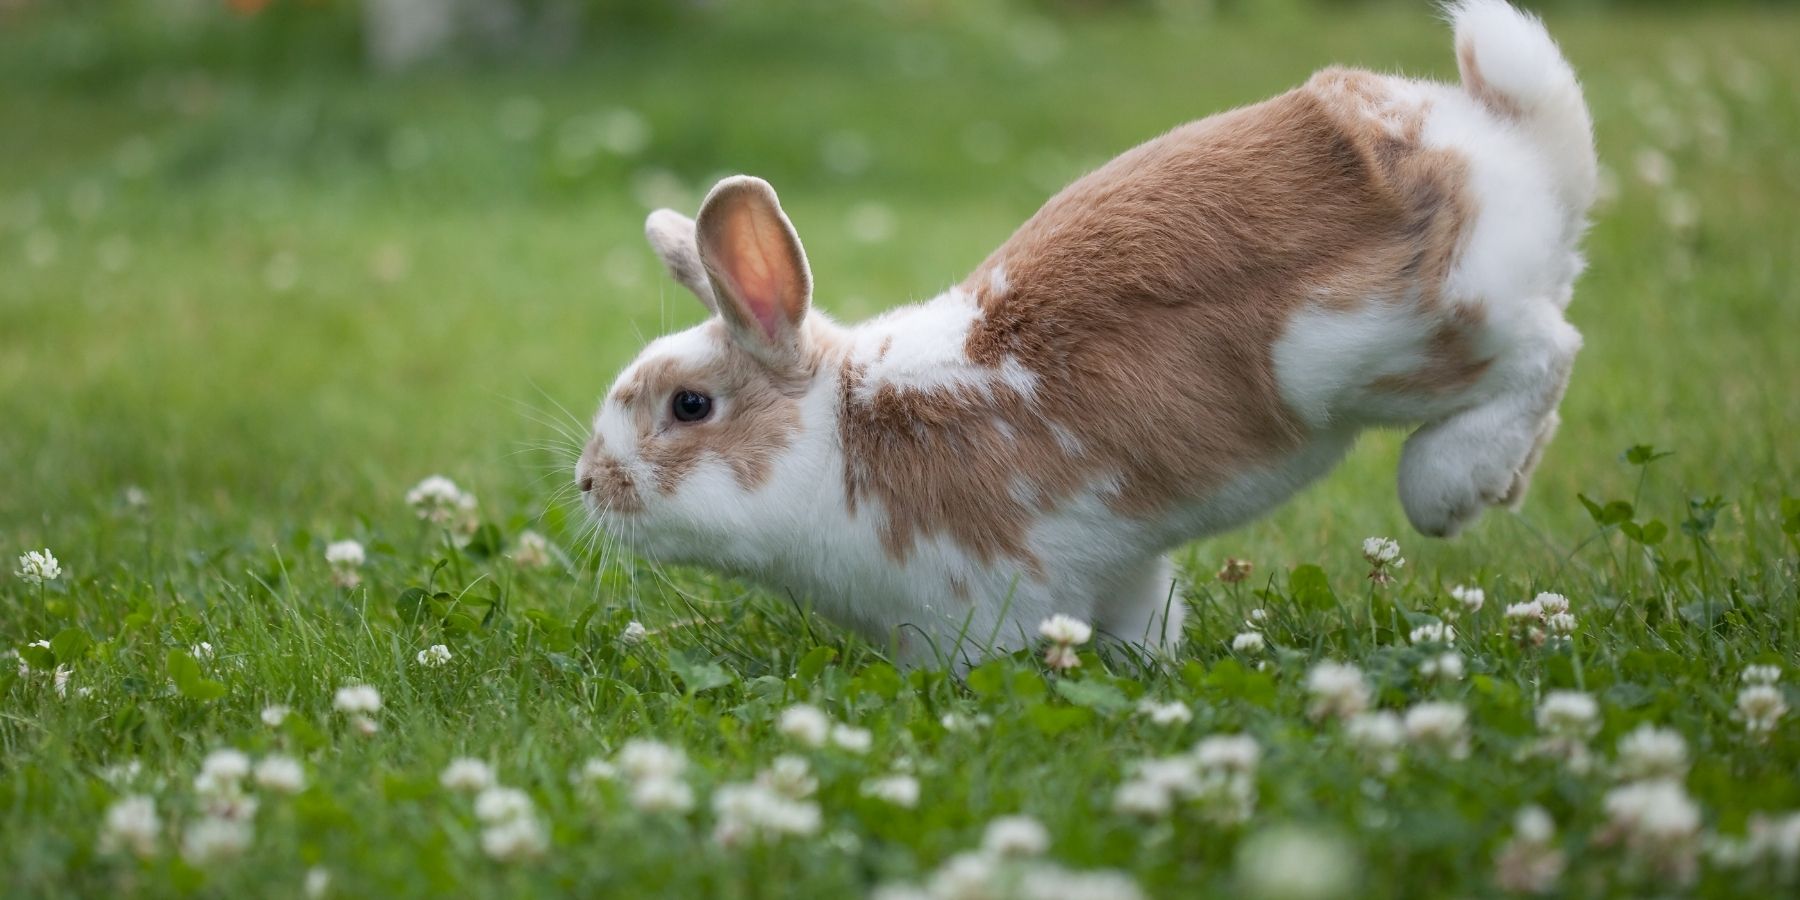 How To Care For A Rabbit Outdoors